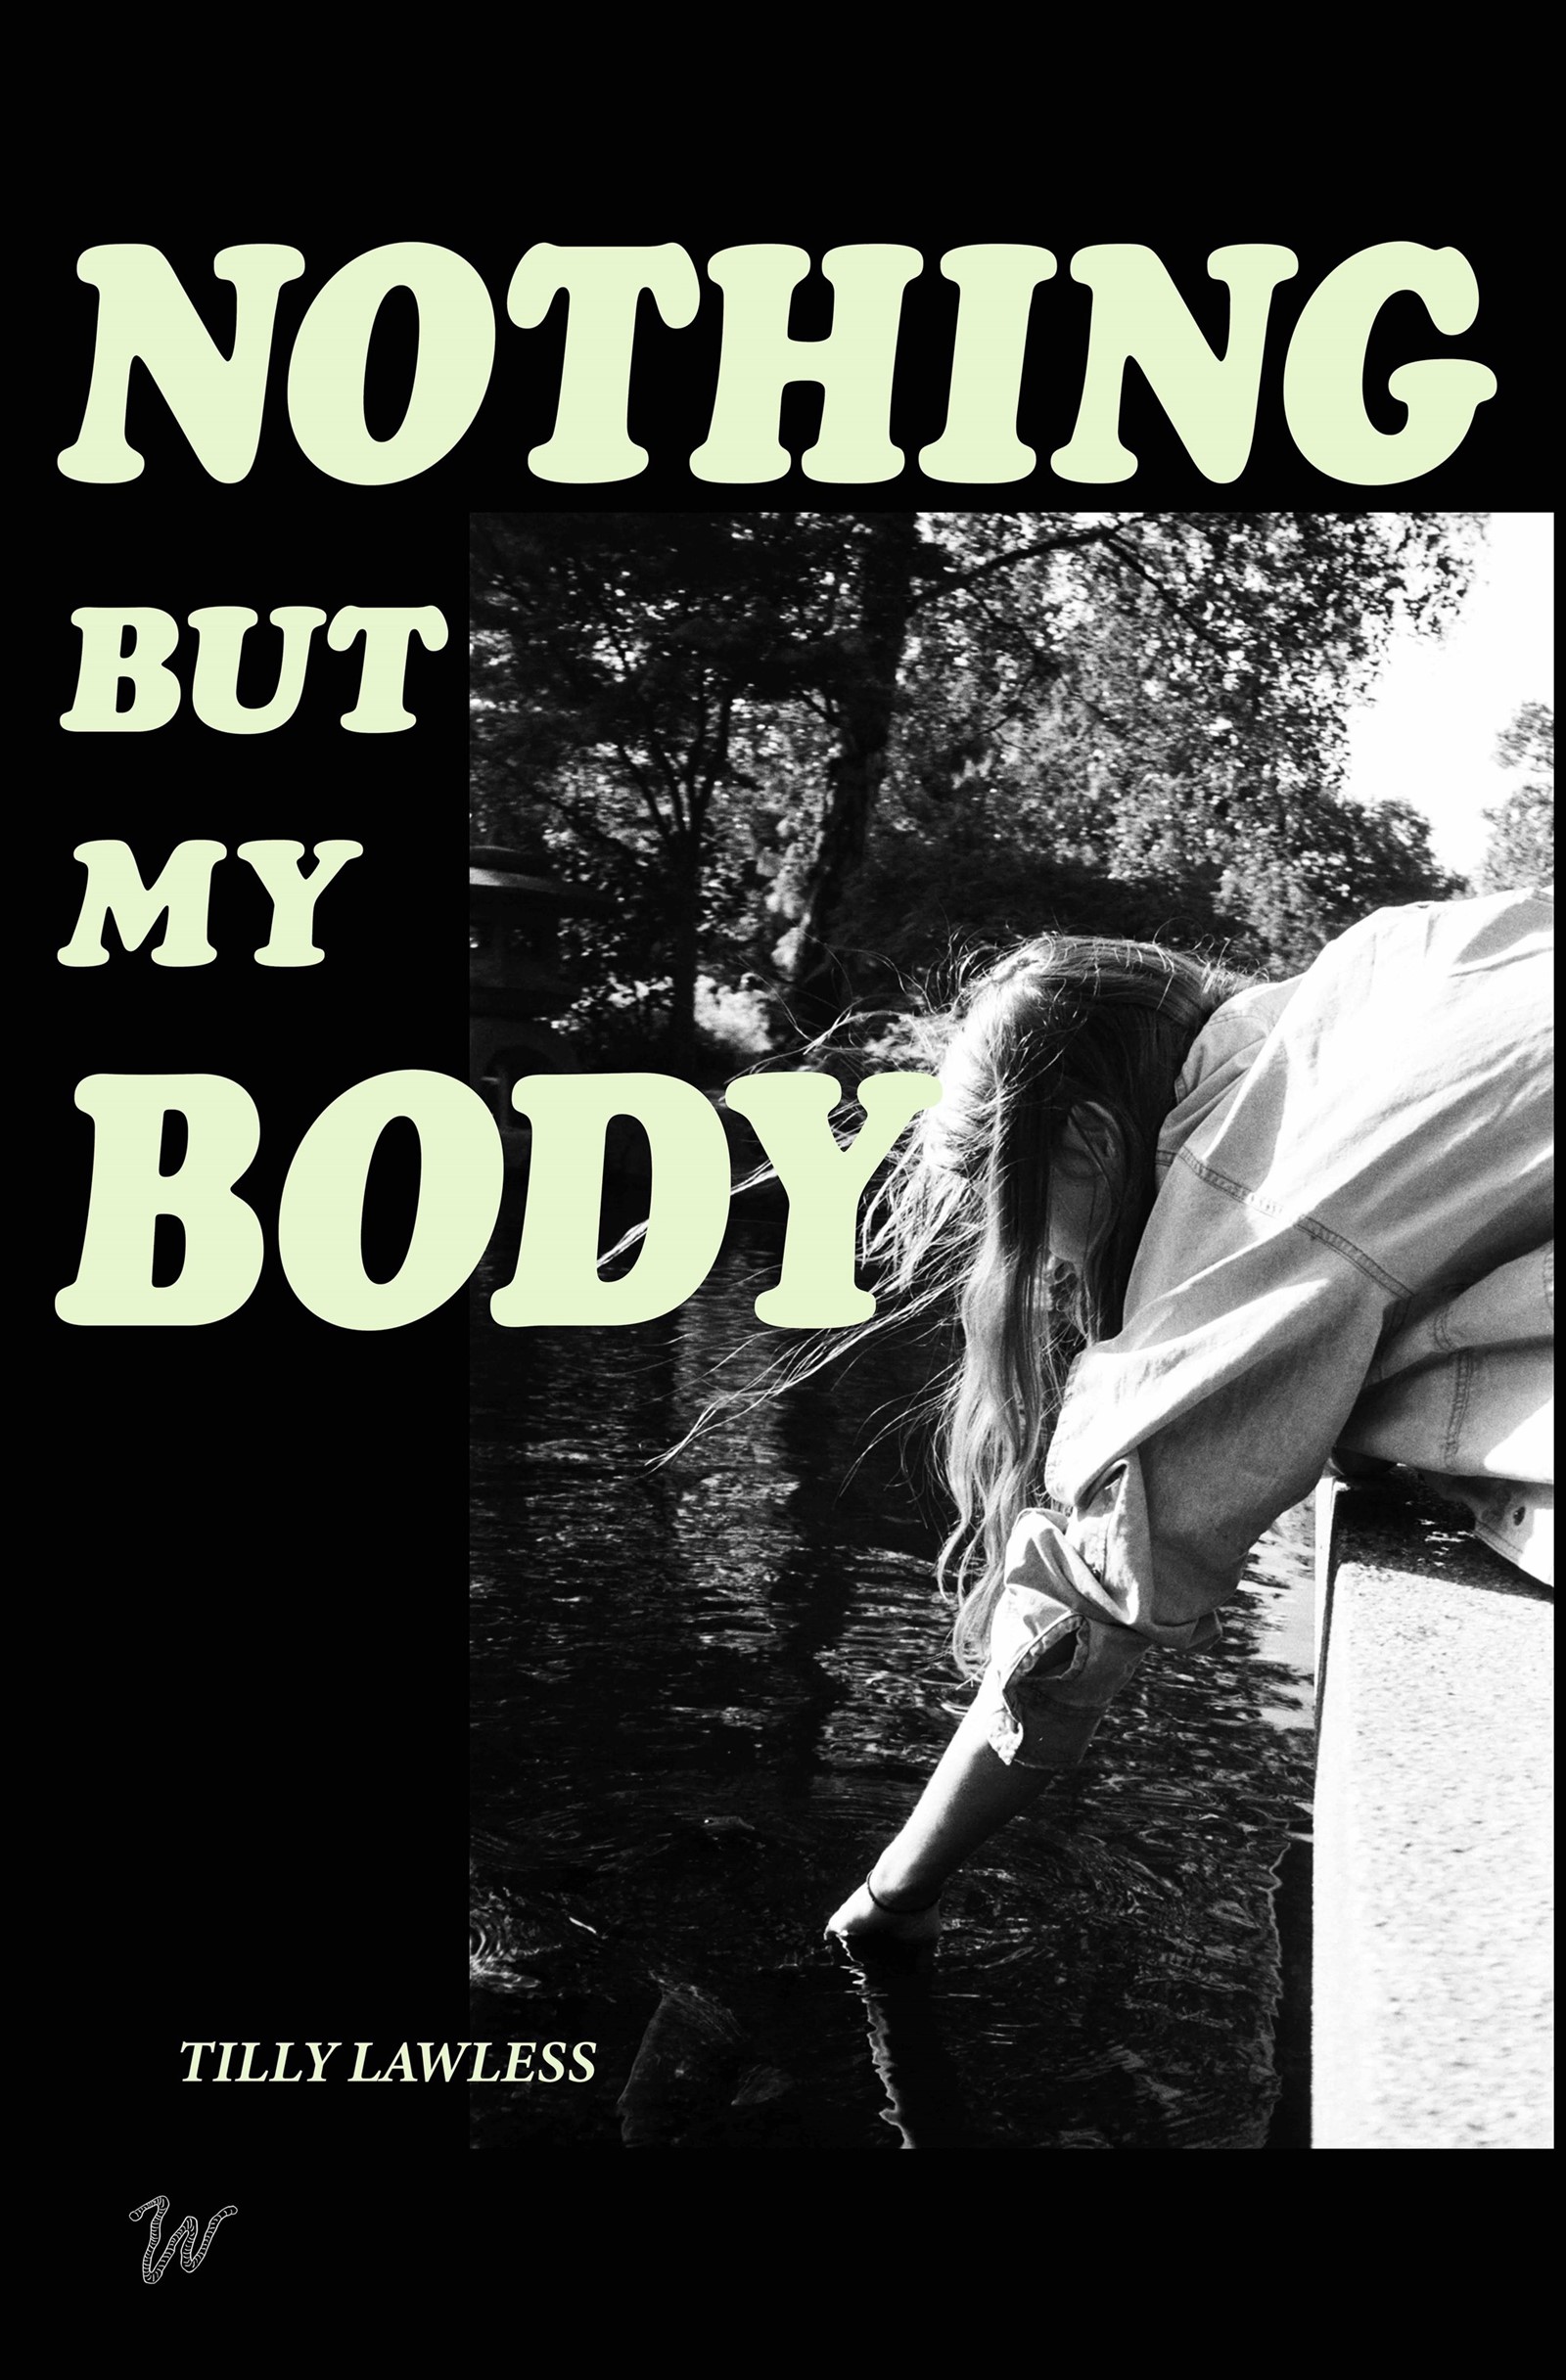 Nothing But My Body by Tilly Lawless